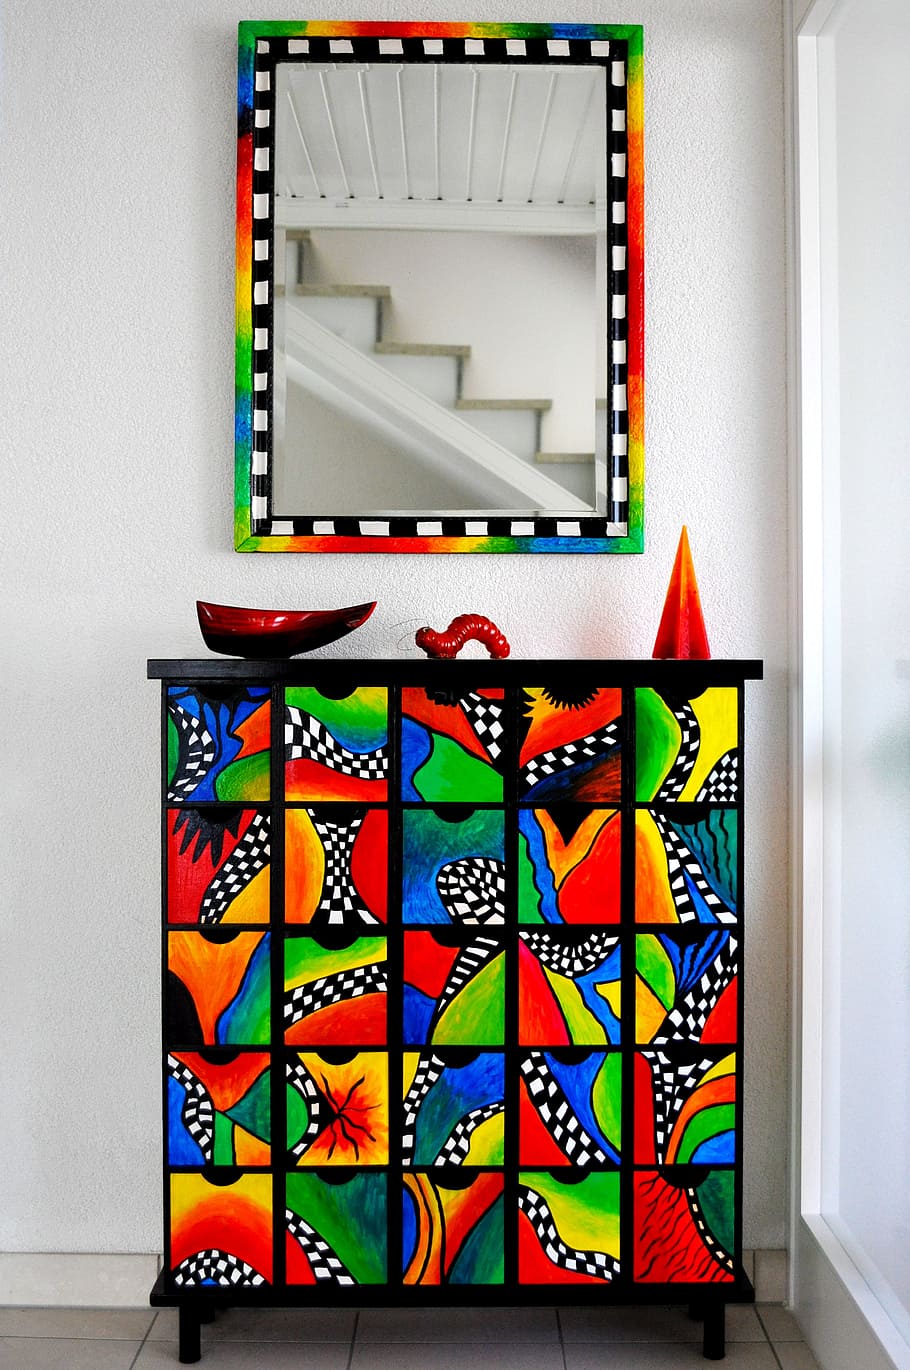 chest of drawers, mirror, colorful, decorative, multi colored, art and craft, creativity, indoors, wall - building feature, pattern